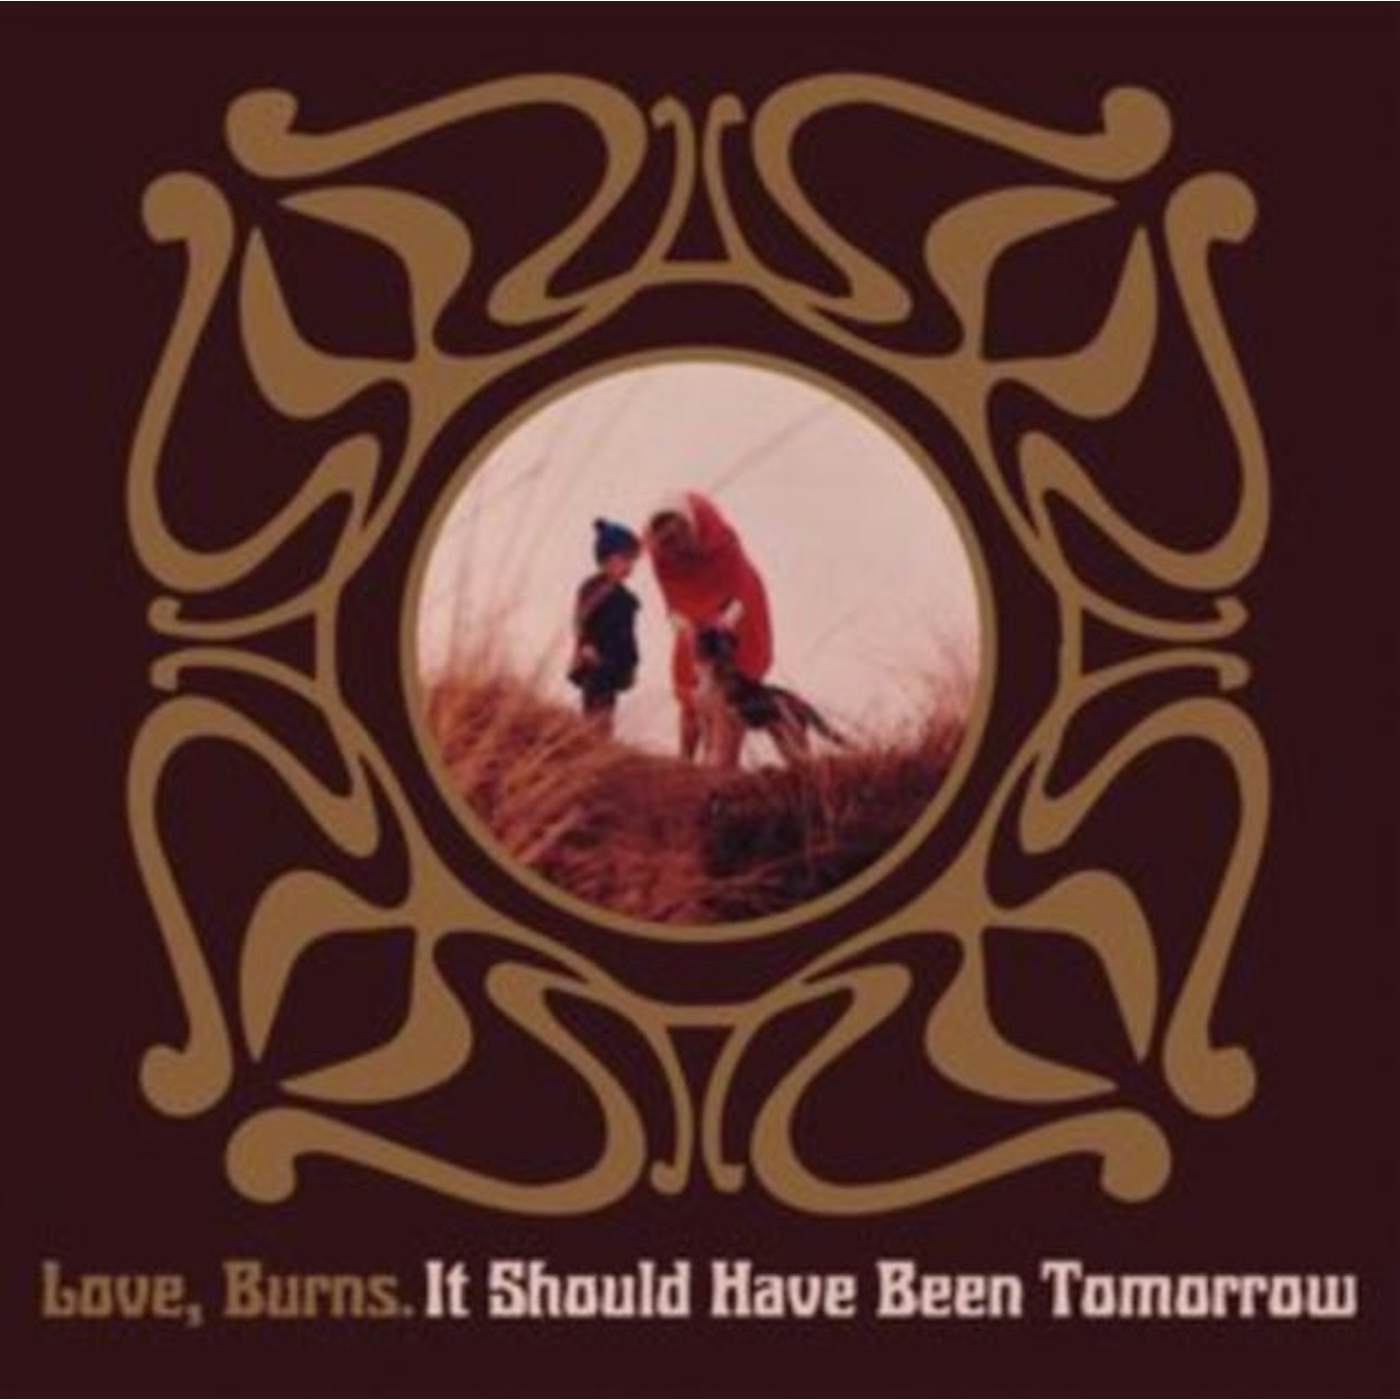 Love, Burns CD - It Should Have Been Tomorrow